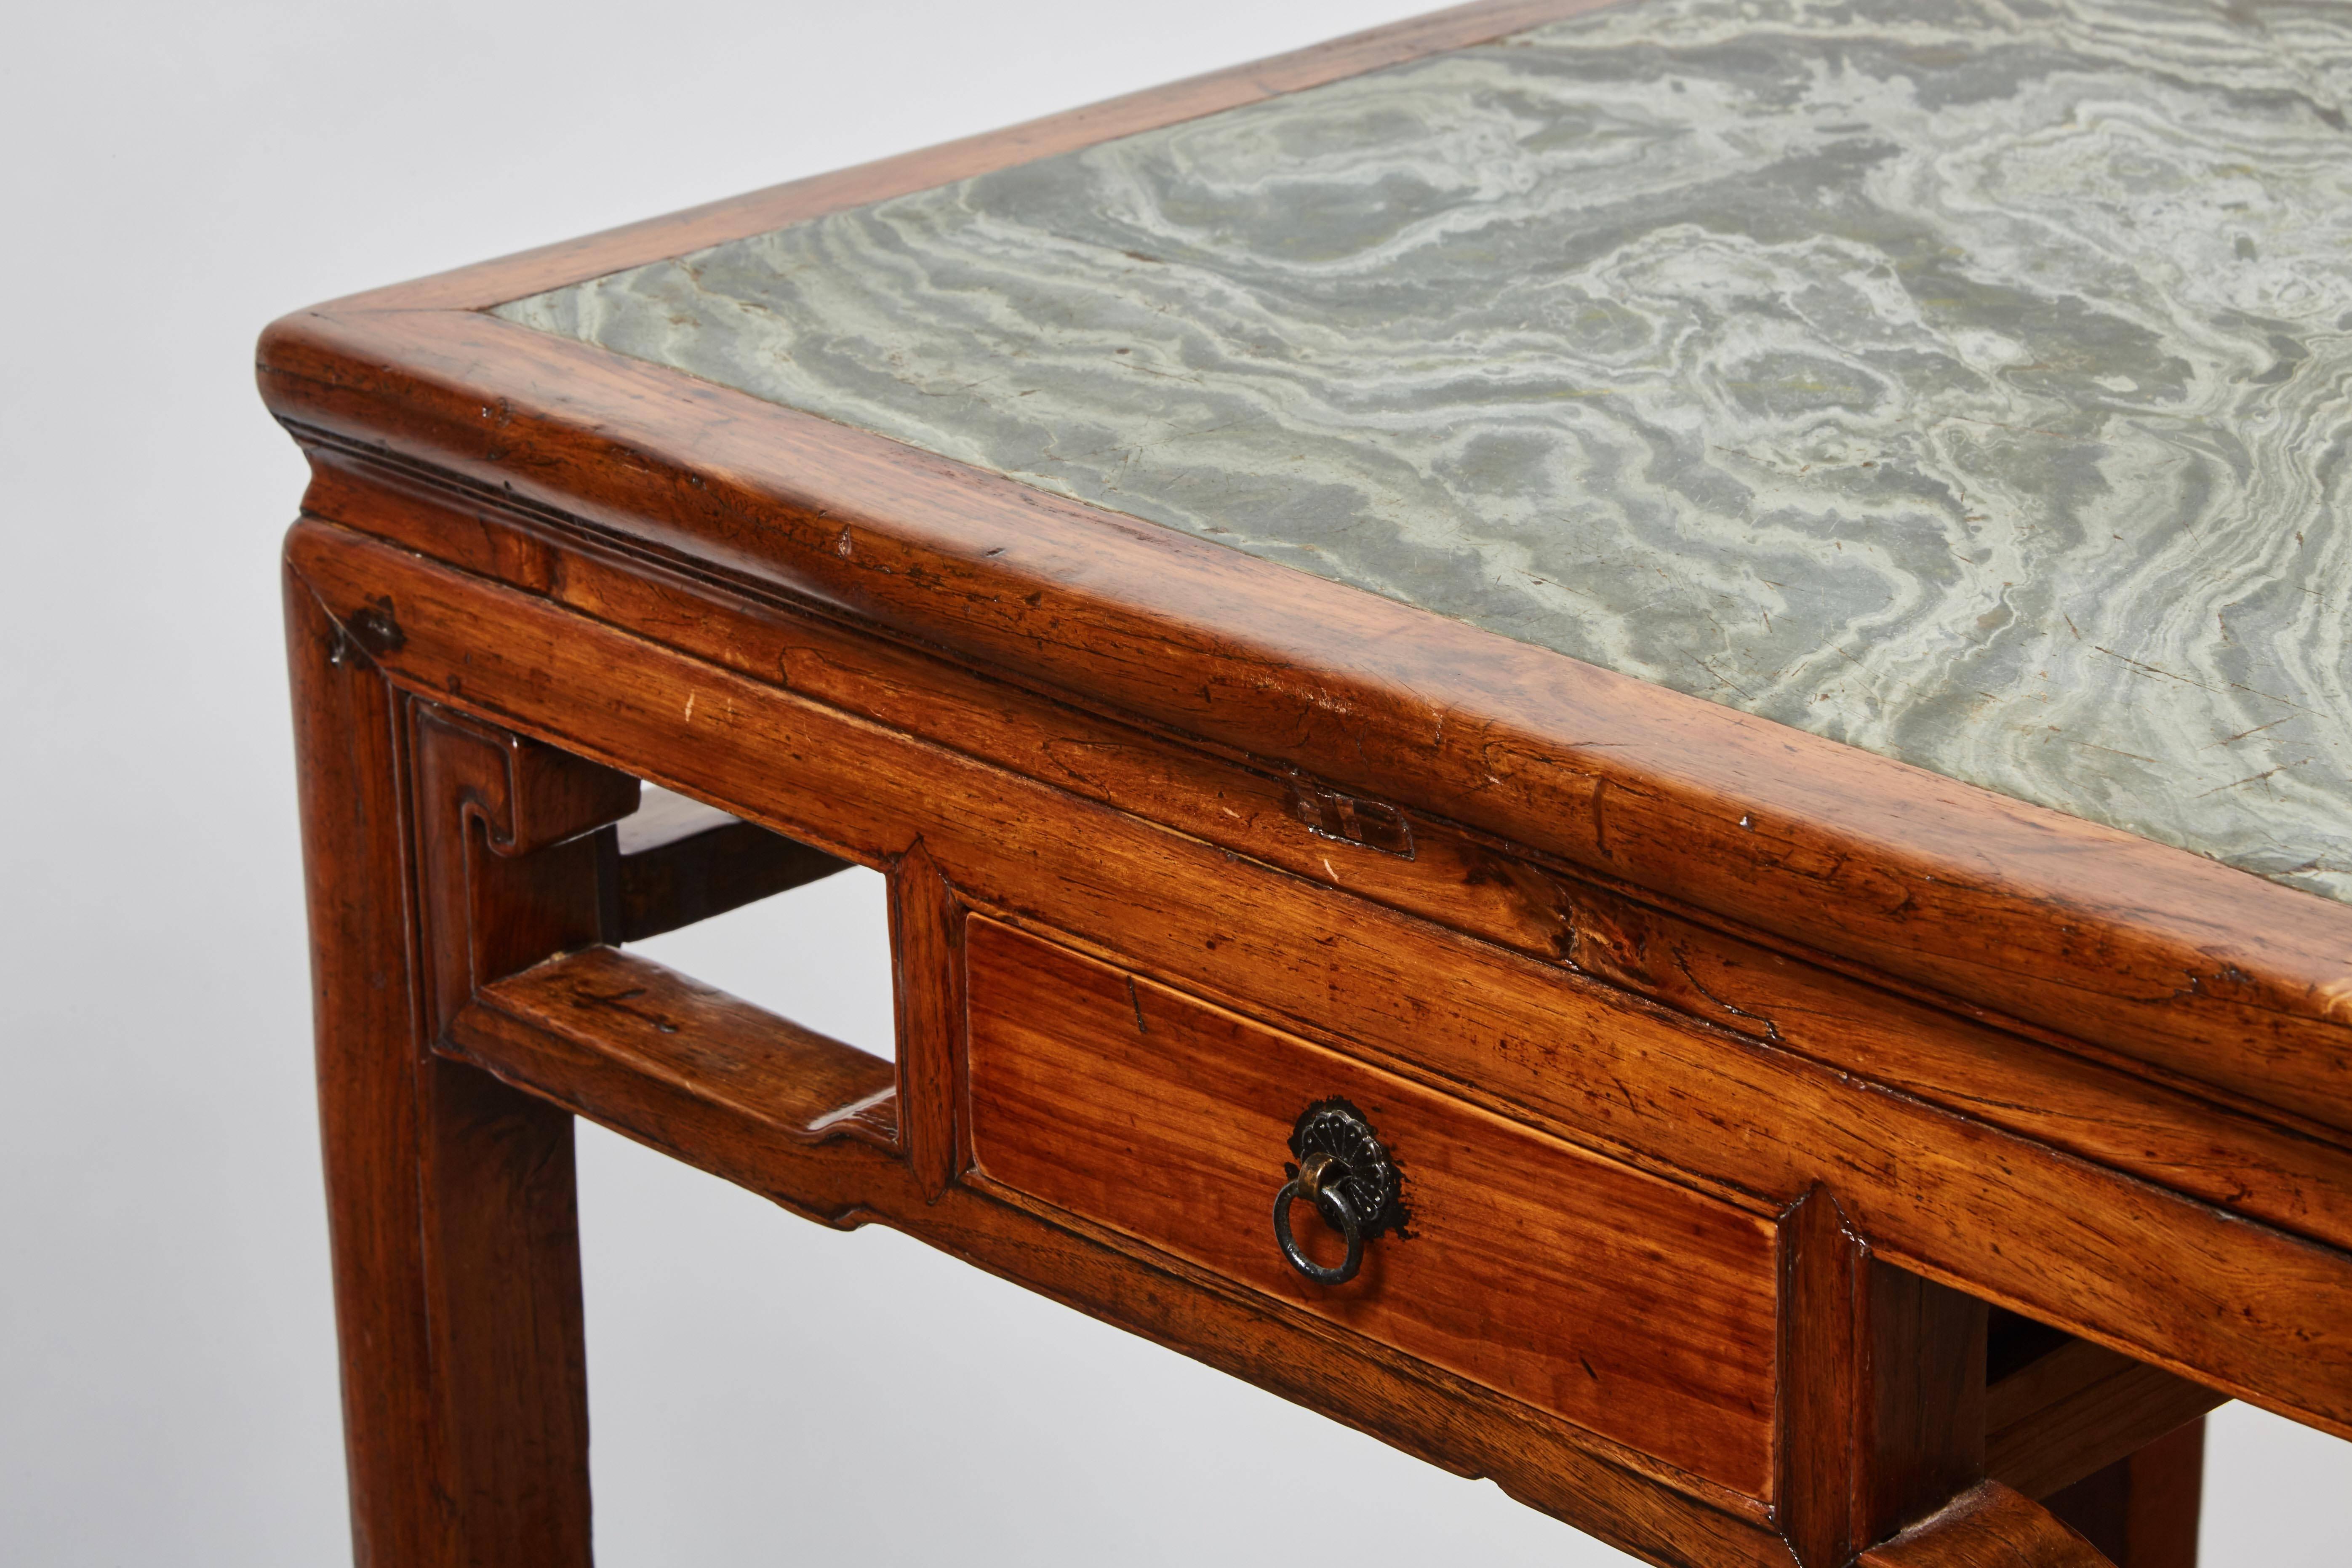 18th Century Chinese Four-Drawer Cedar Square Table with Green Marble In Good Condition For Sale In Pasadena, CA